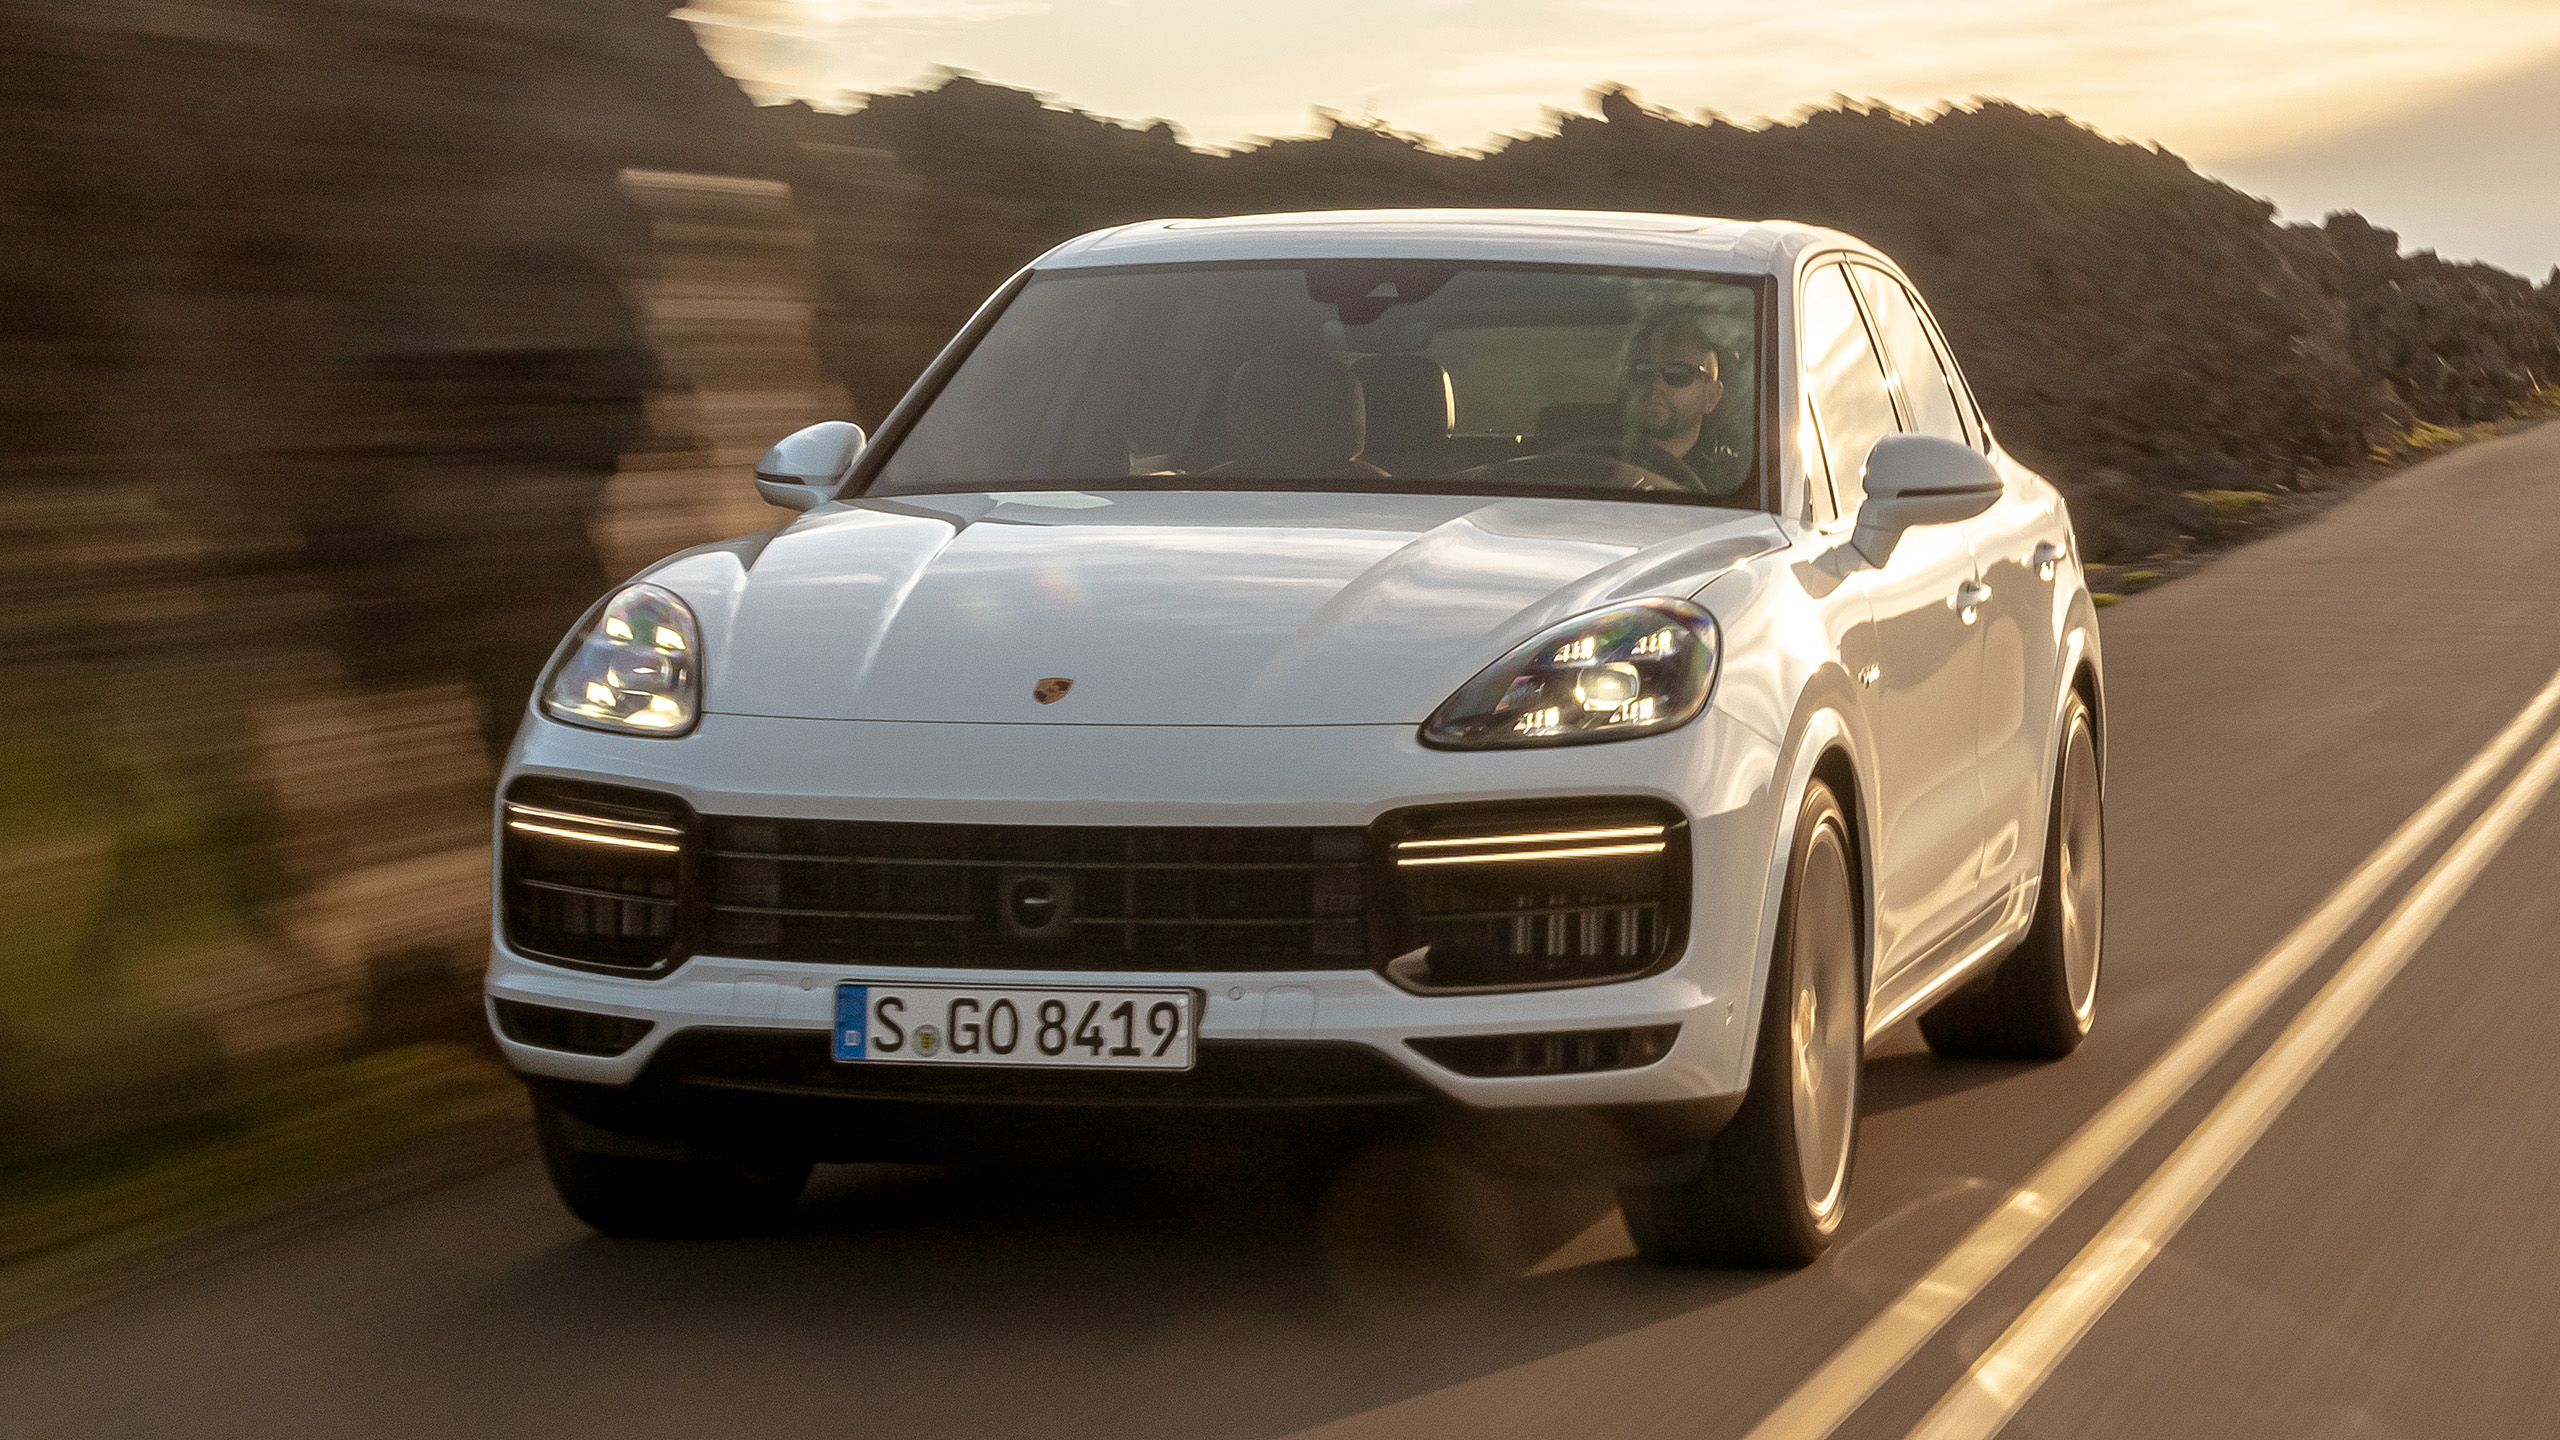 2020 Cayenne Turbo S Drive Photo Gallery